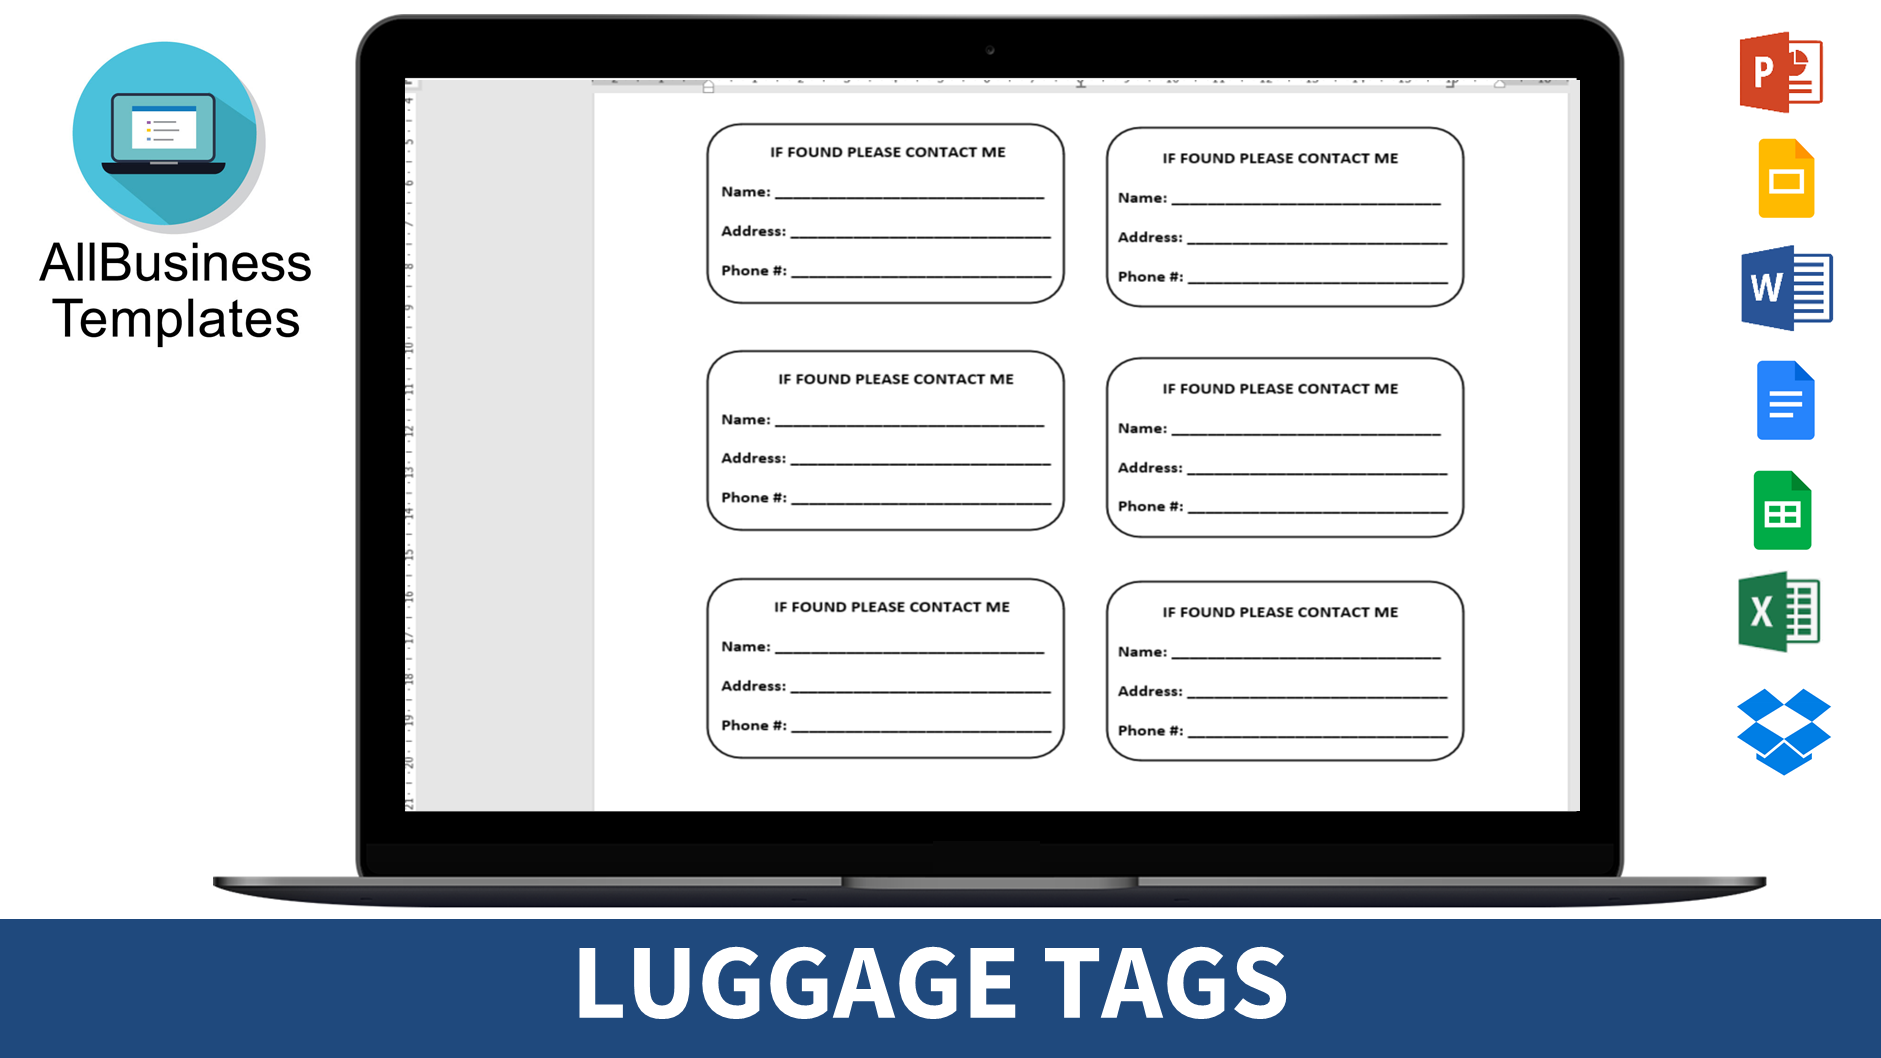 Free Printable Luggage Tags  Templates at allbusinesstemplates.com For Luggage Label Template Free Download